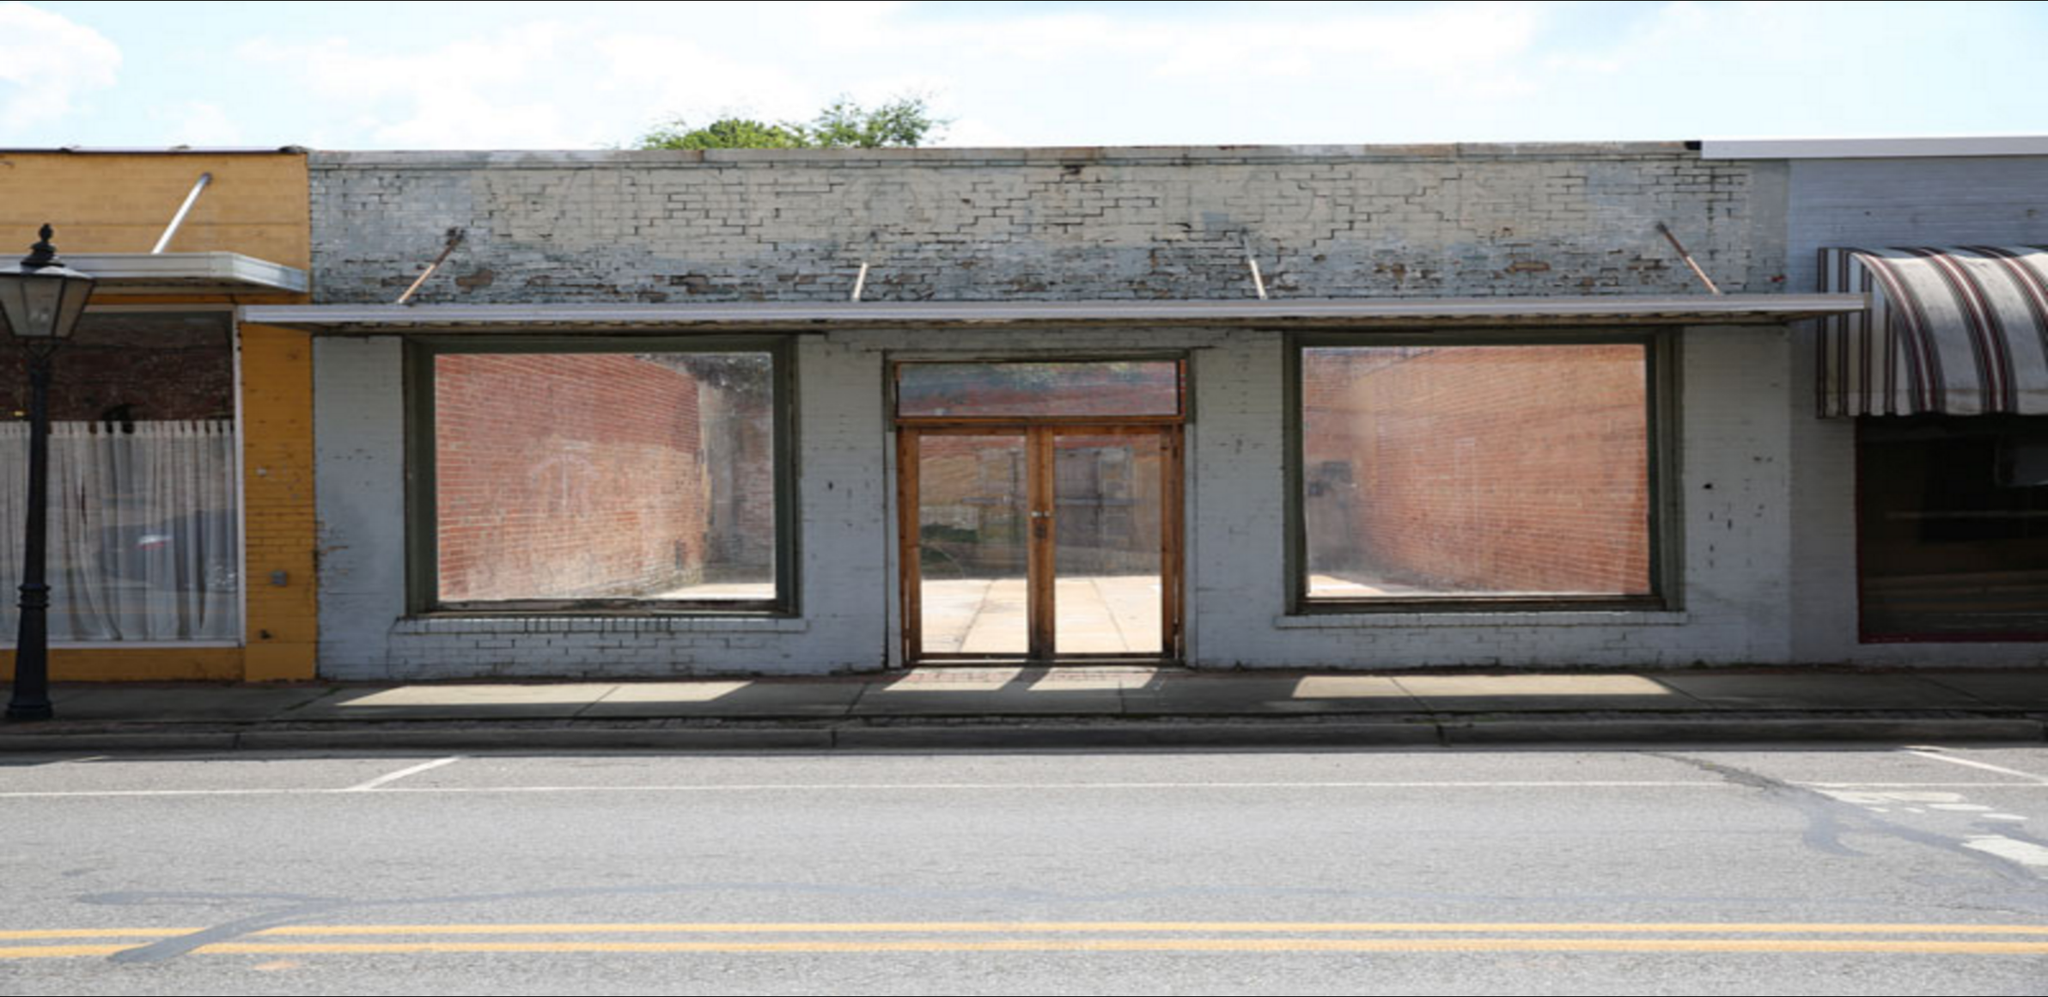 Broad Street Storefront donated to Coleman Center, July 2013